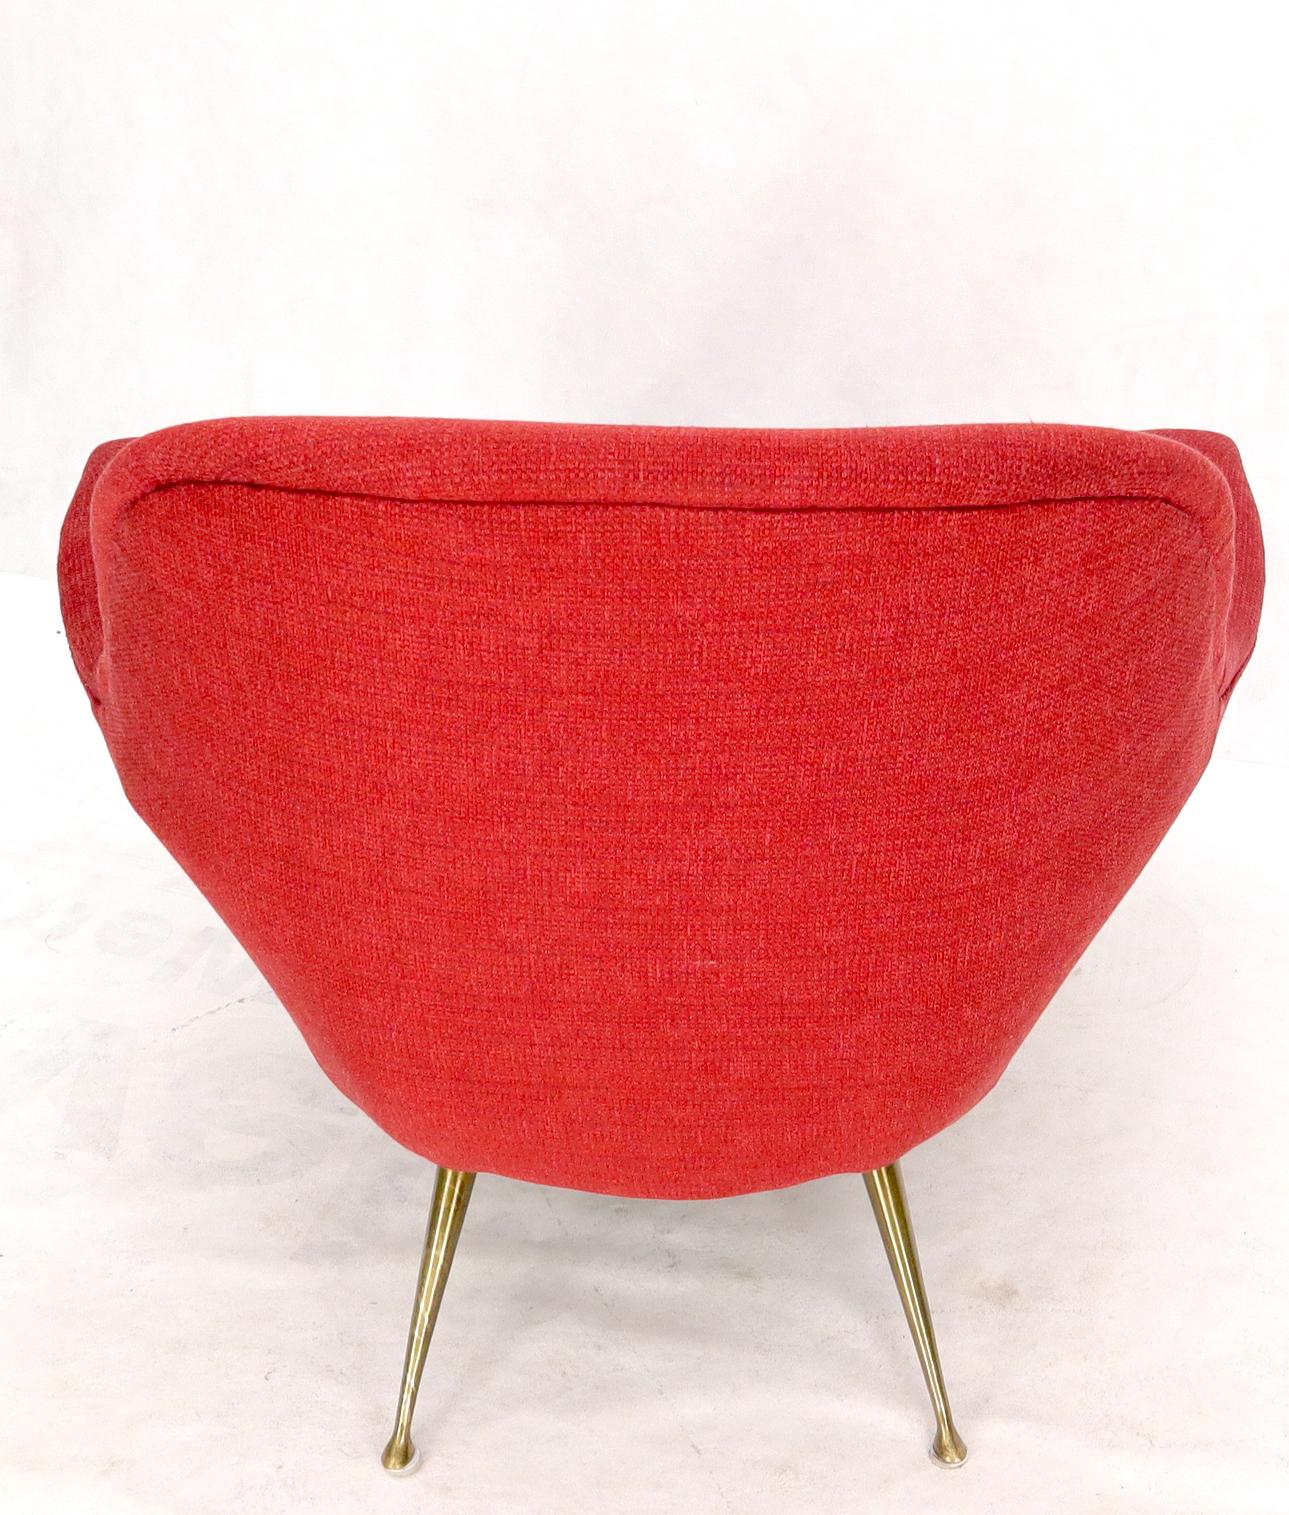 Italian Mid-Century Modern New Red Upholstery Lounge Chair on Solid Brass Legs For Sale 9